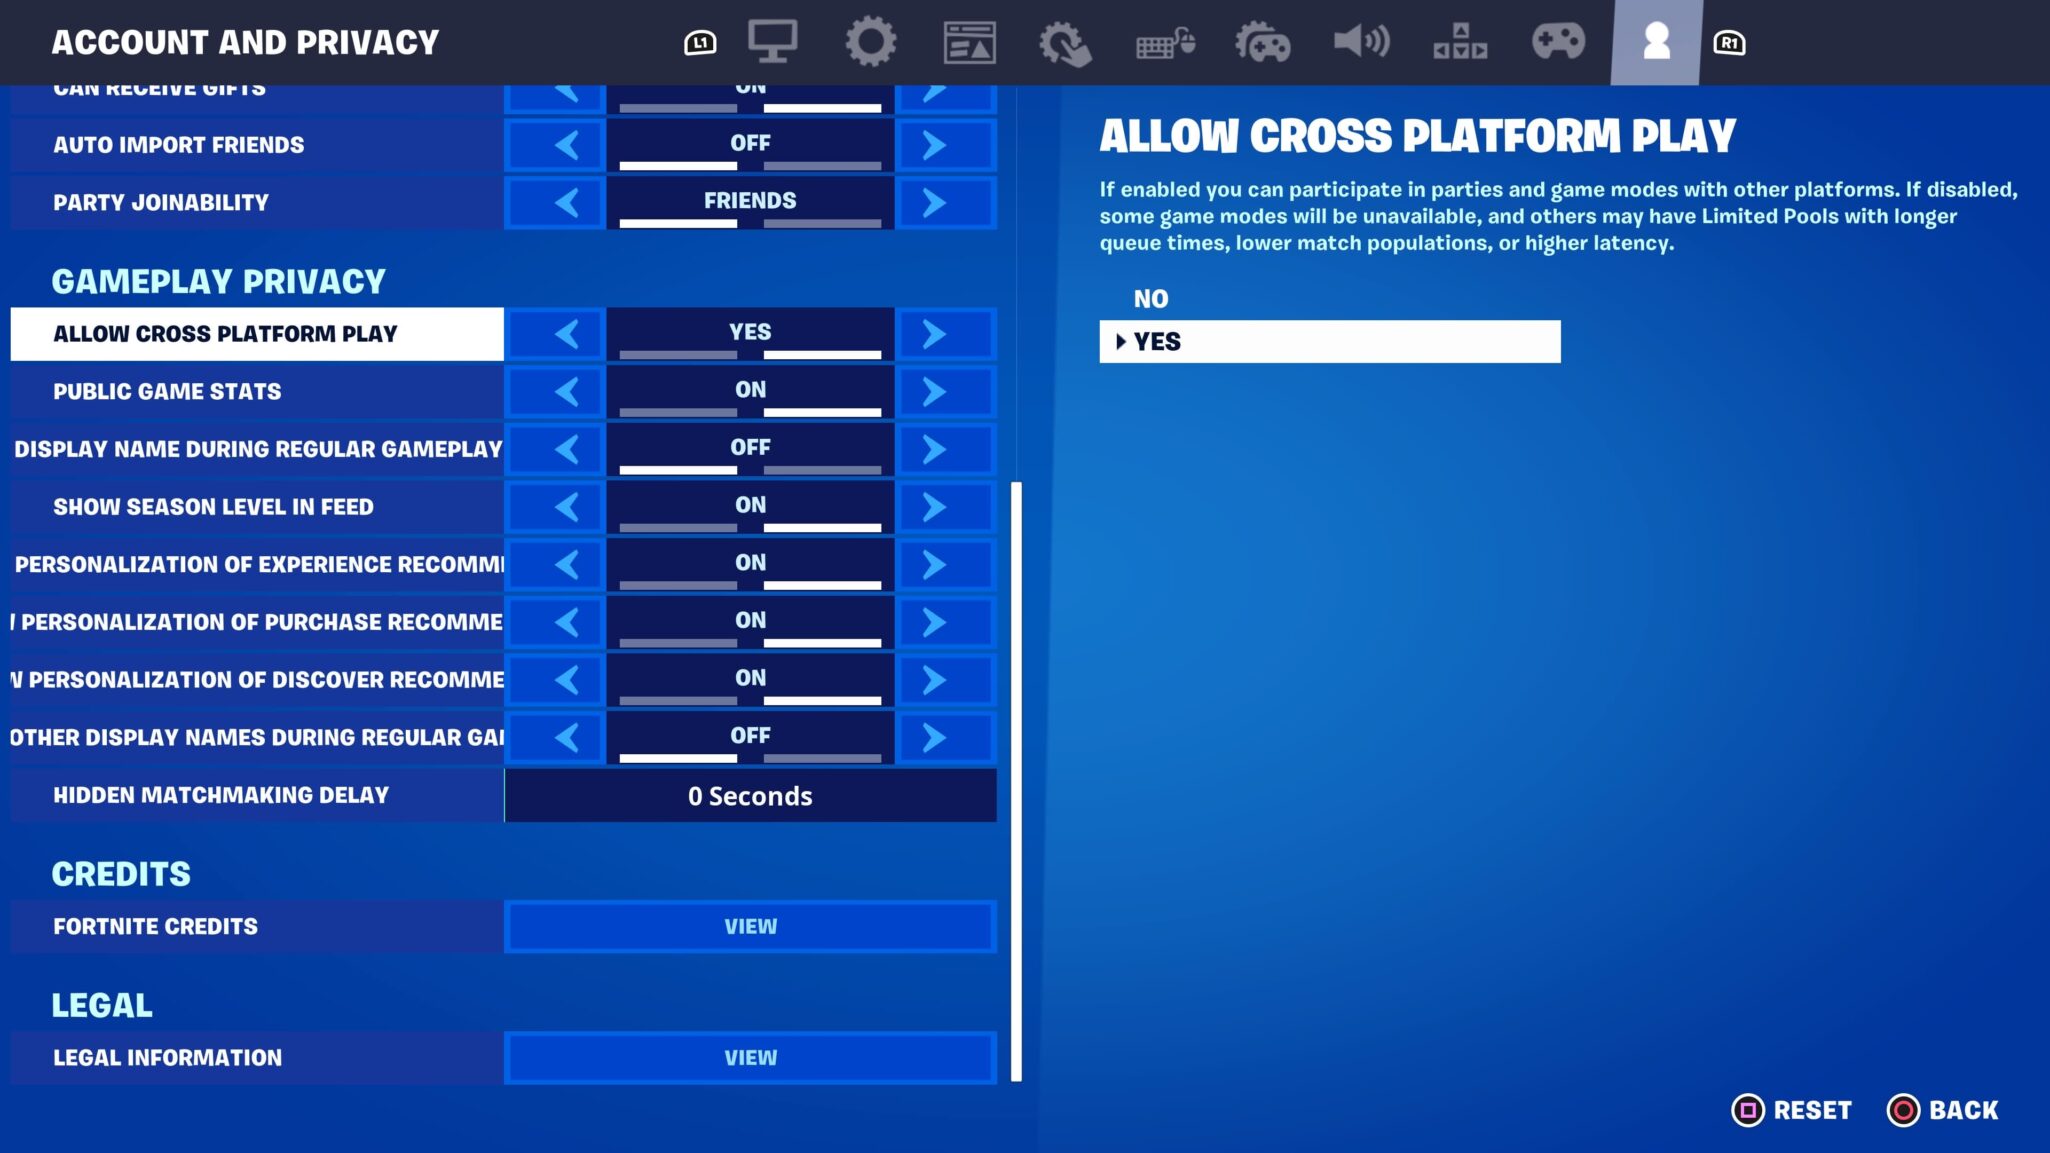 How to ENABLE CROSS PLAY & Invite Friends